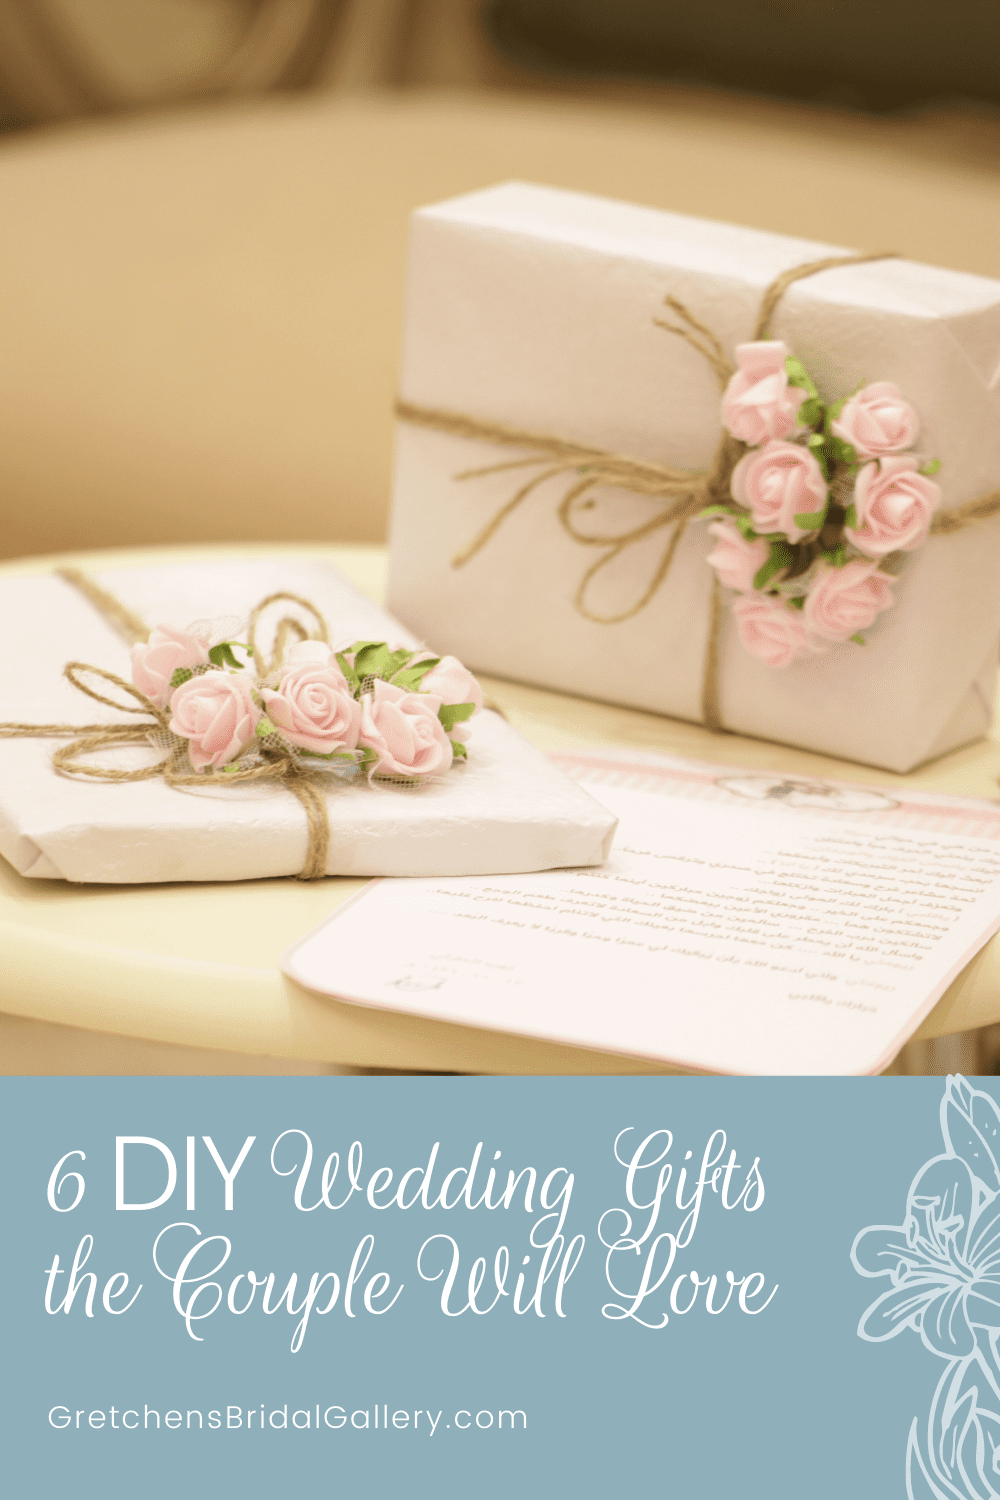 DIY wedding gifts that the couple will love